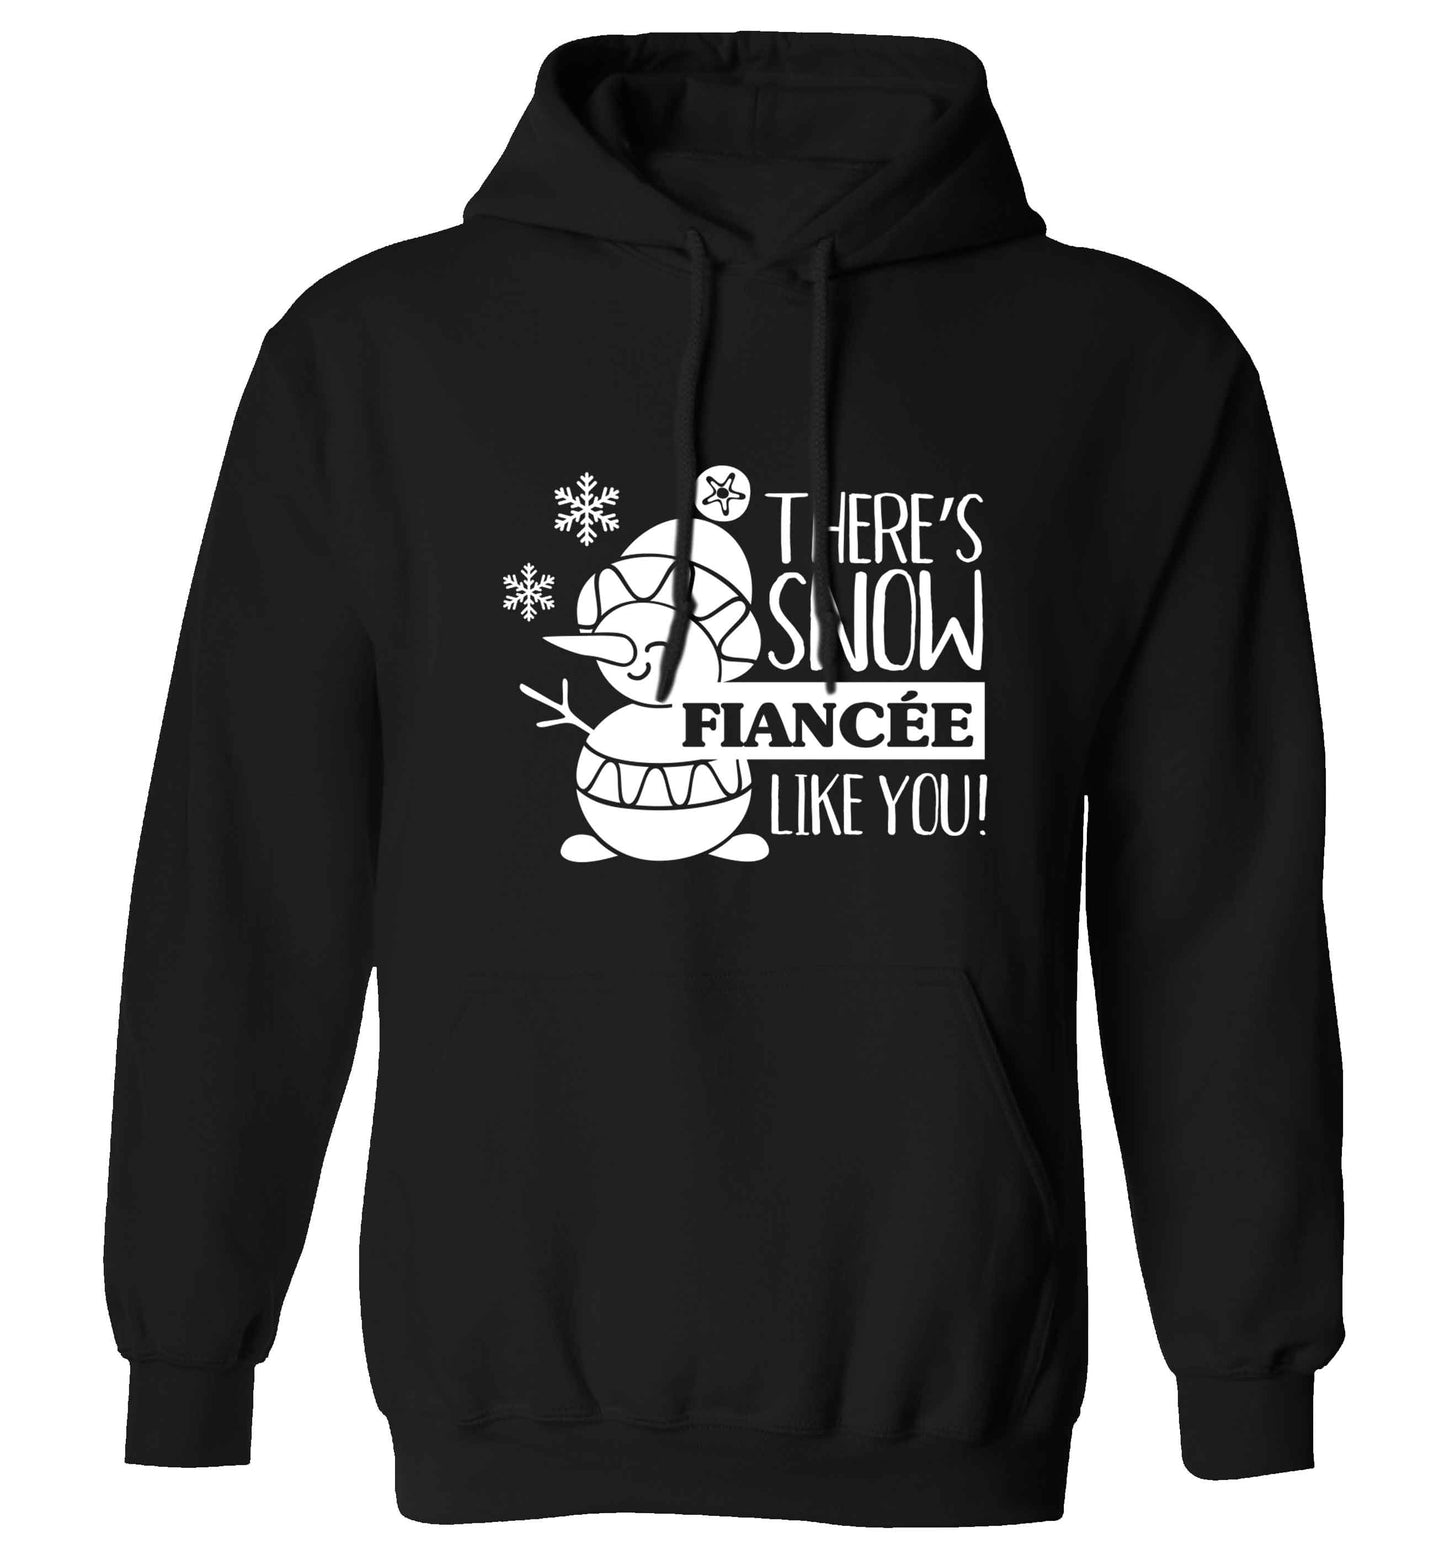 There's snow fiancee like you adults unisex black hoodie 2XL